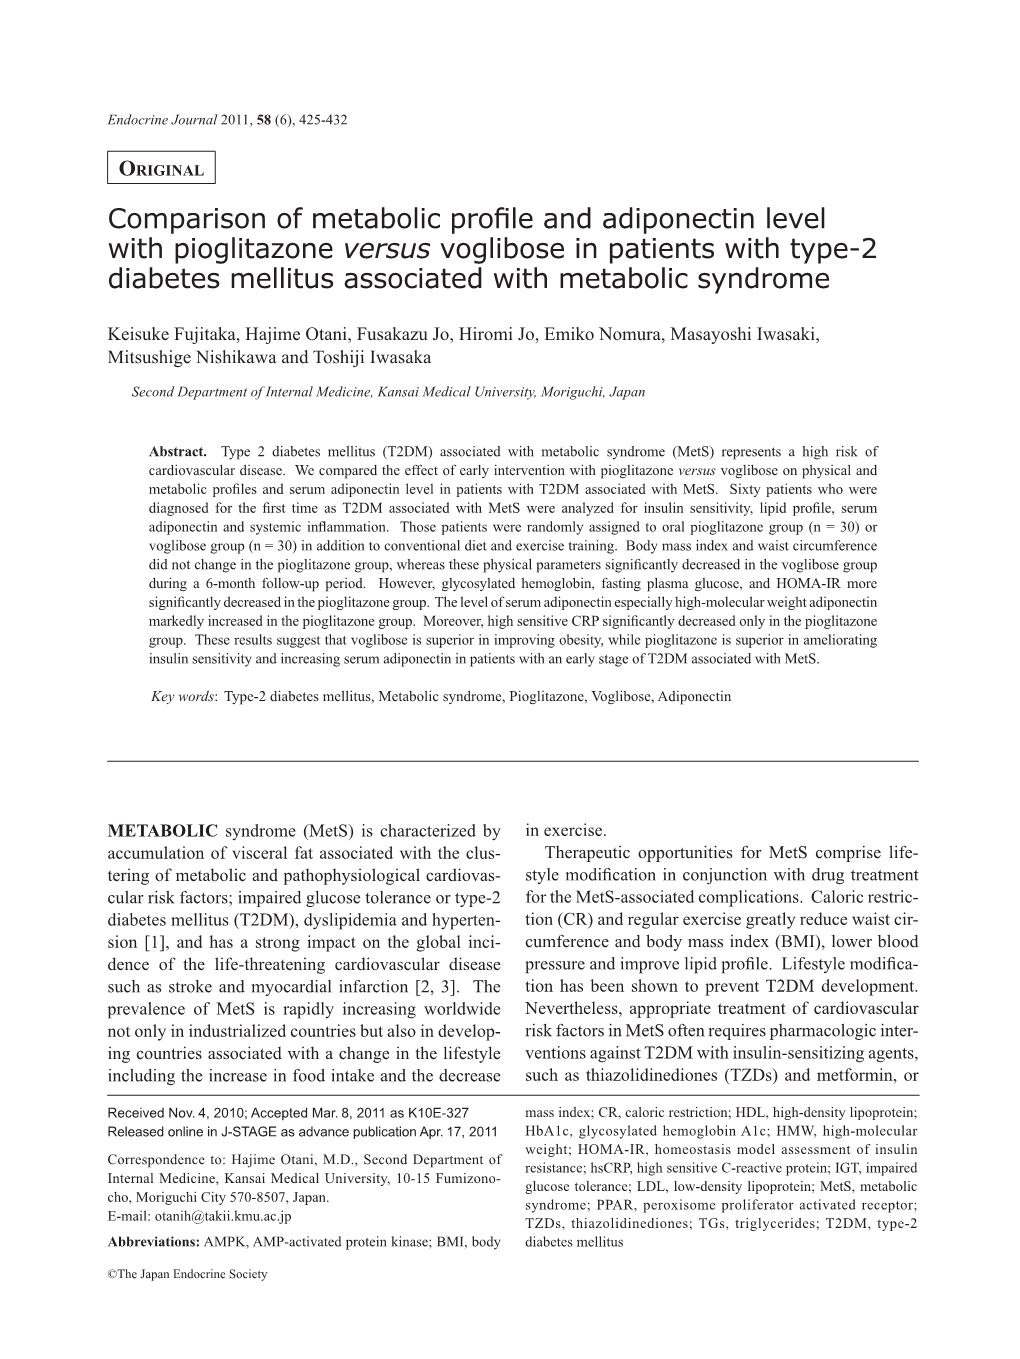 Comparison of Metabolic Profile and Adiponectin Level with Pioglitazone Versus Voglibose in Patients with Type-2 Diabetes Mellitus Associated with Metabolic Syndrome